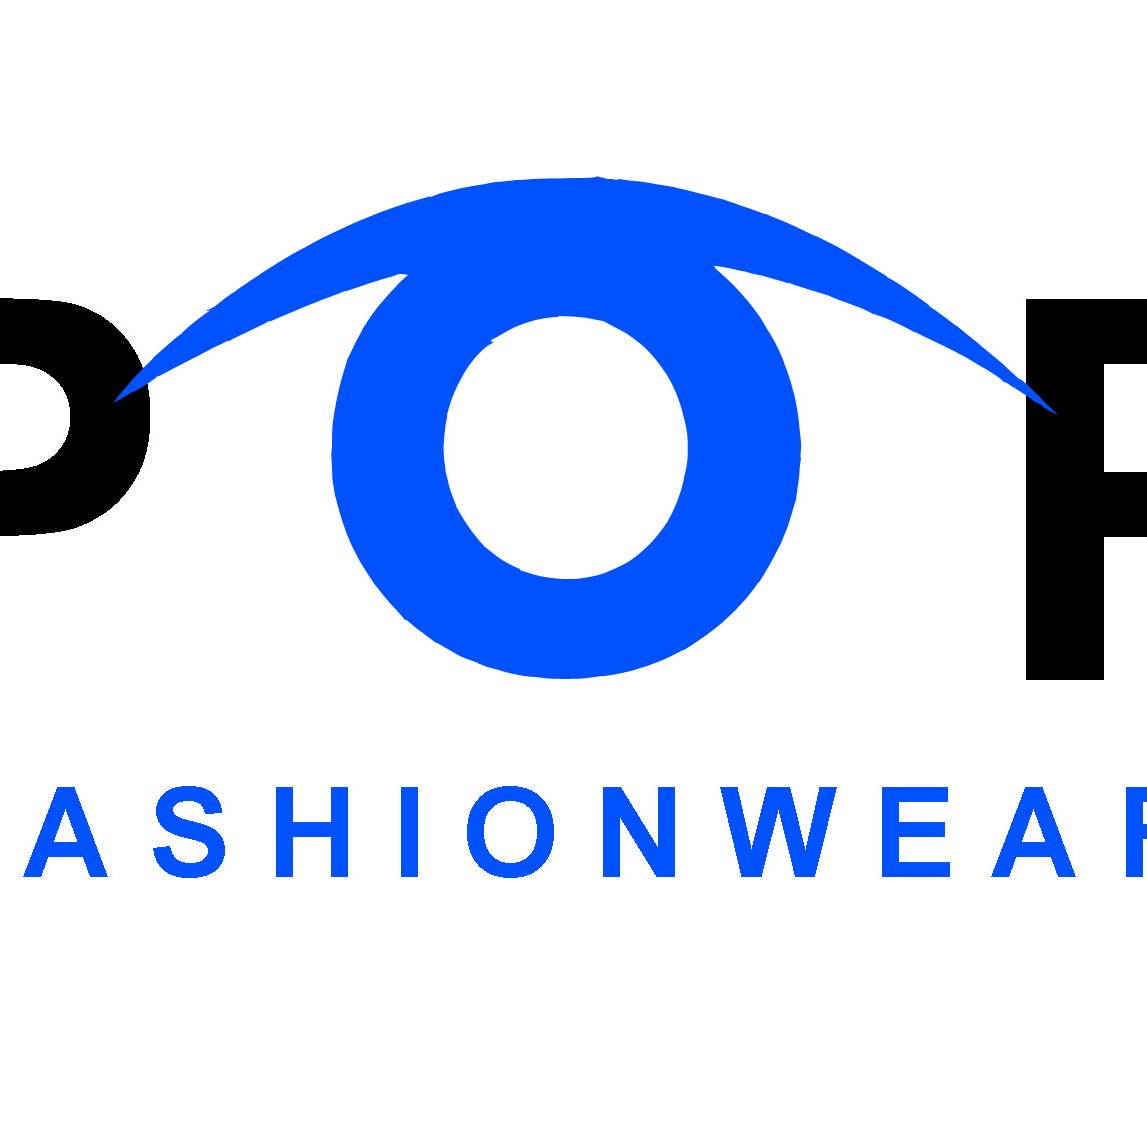 (Pop Fashionwear Inc.) is one of the largest sunglasses and head wear wholesale distributors in the east coast. Since established in 2002.
🤓👓🕶️